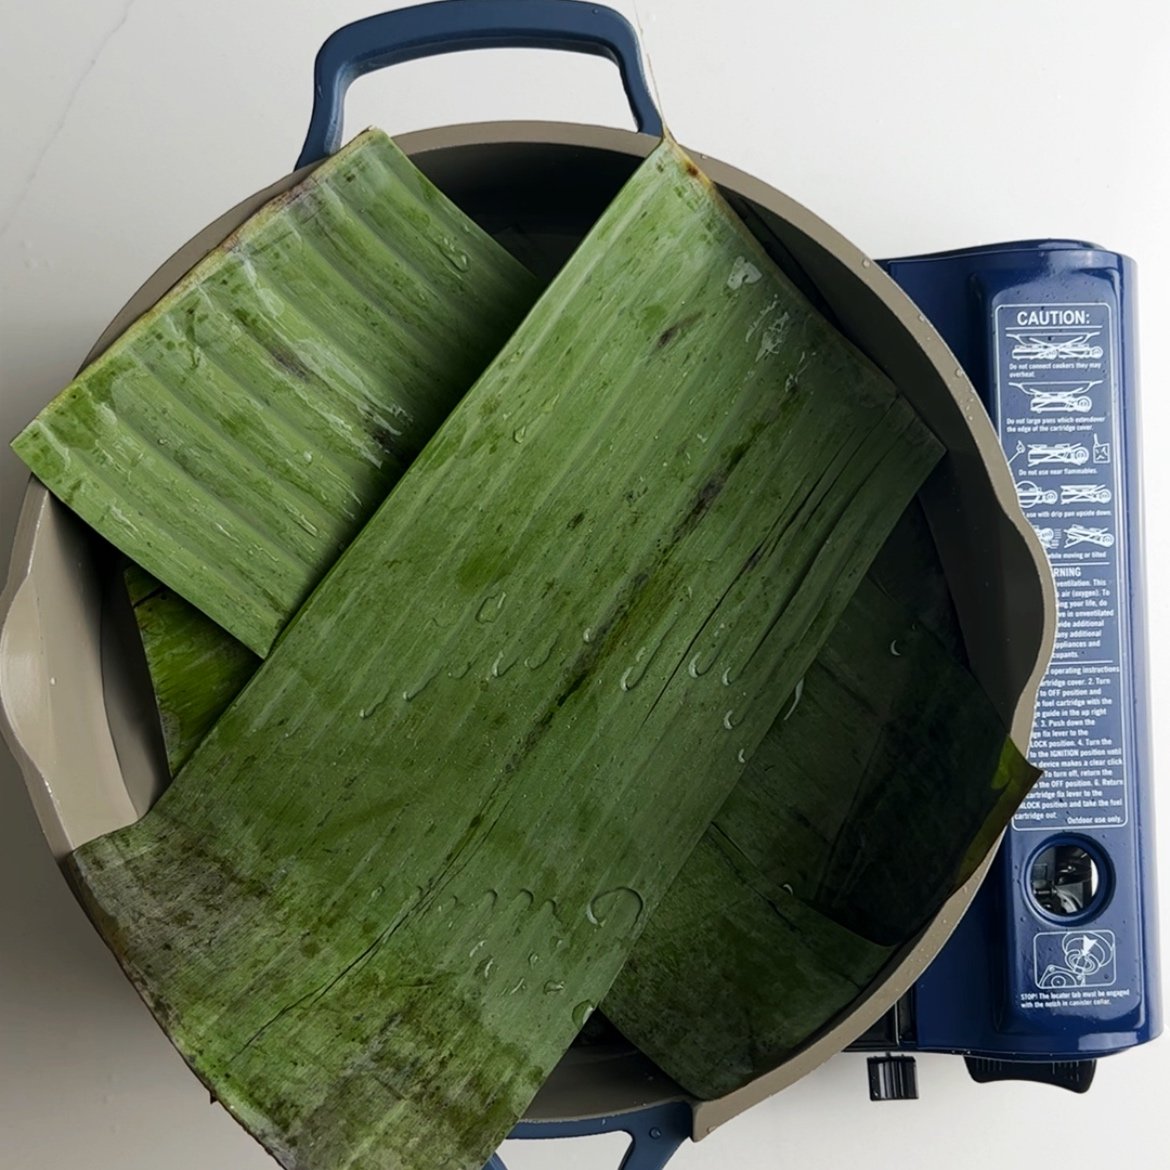 layering extra banana leaves into a pot to steam conkie